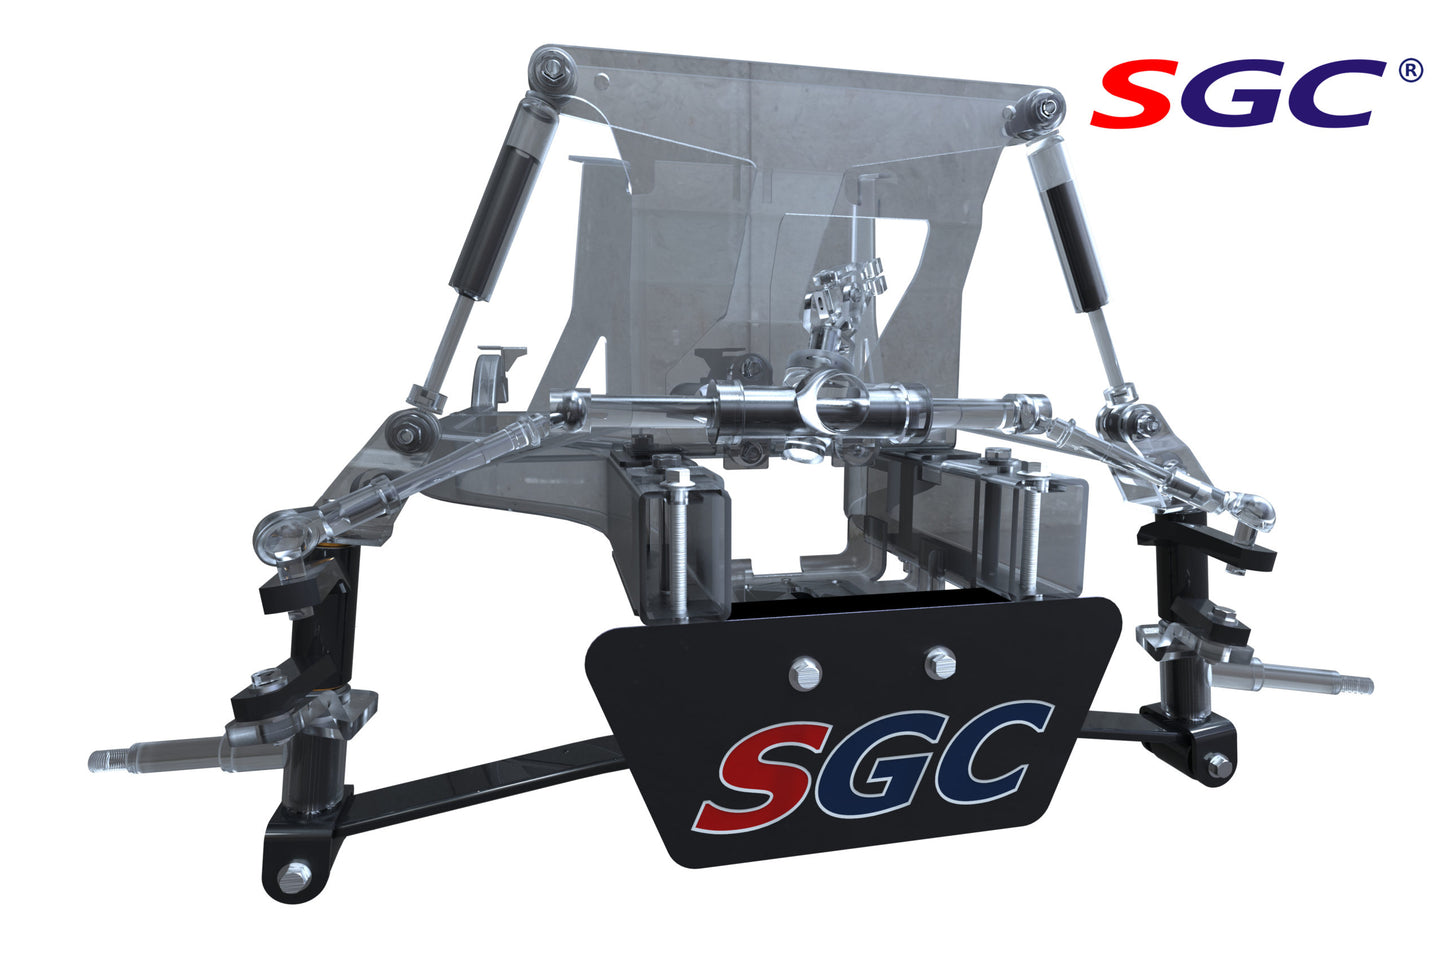 SGC LIFT KIT – 4” BLOCK (SPINDLE EXTENSION) FOR CLUB CAR PRECEDENT (2004-UP)